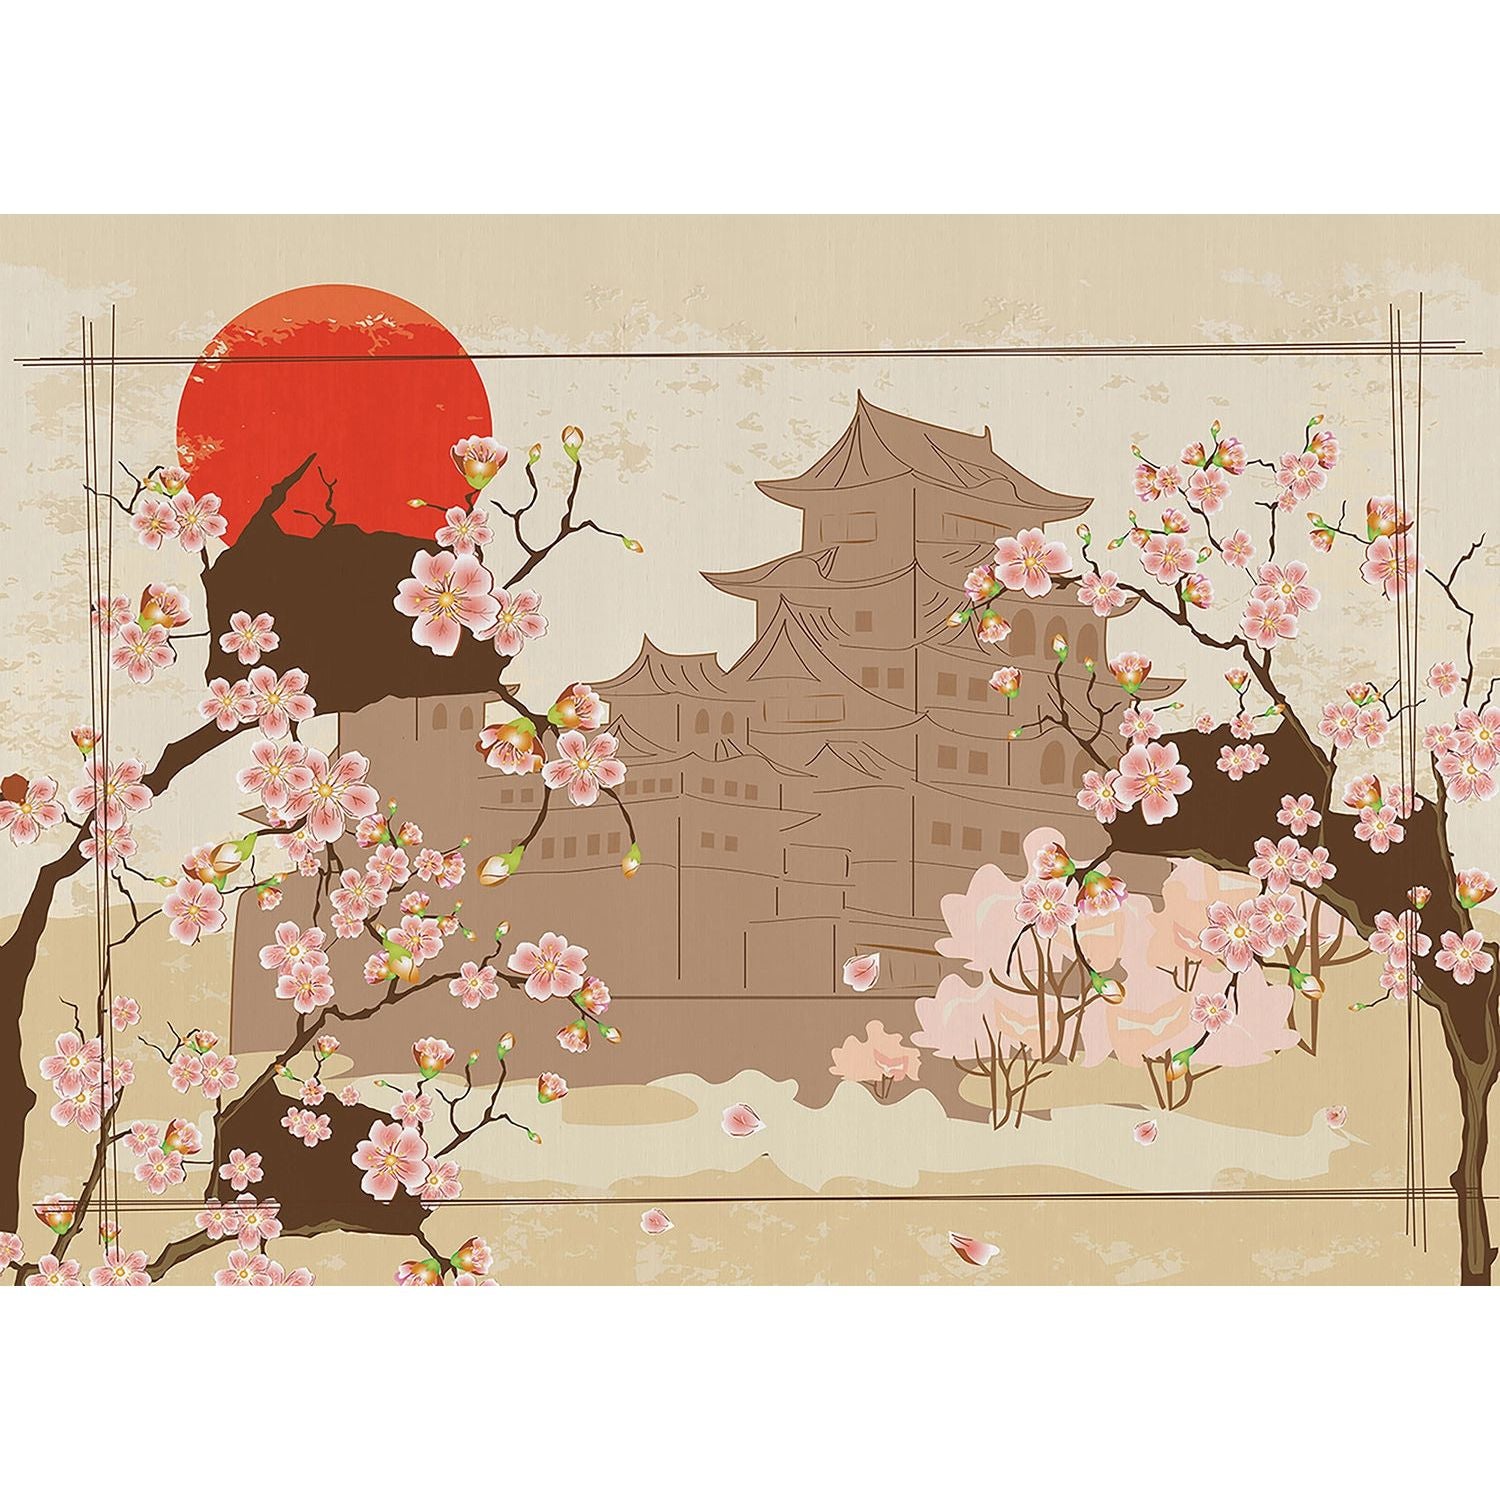 Eastern Blossom: Cherry Blossoms and Pagoda Wall Mural